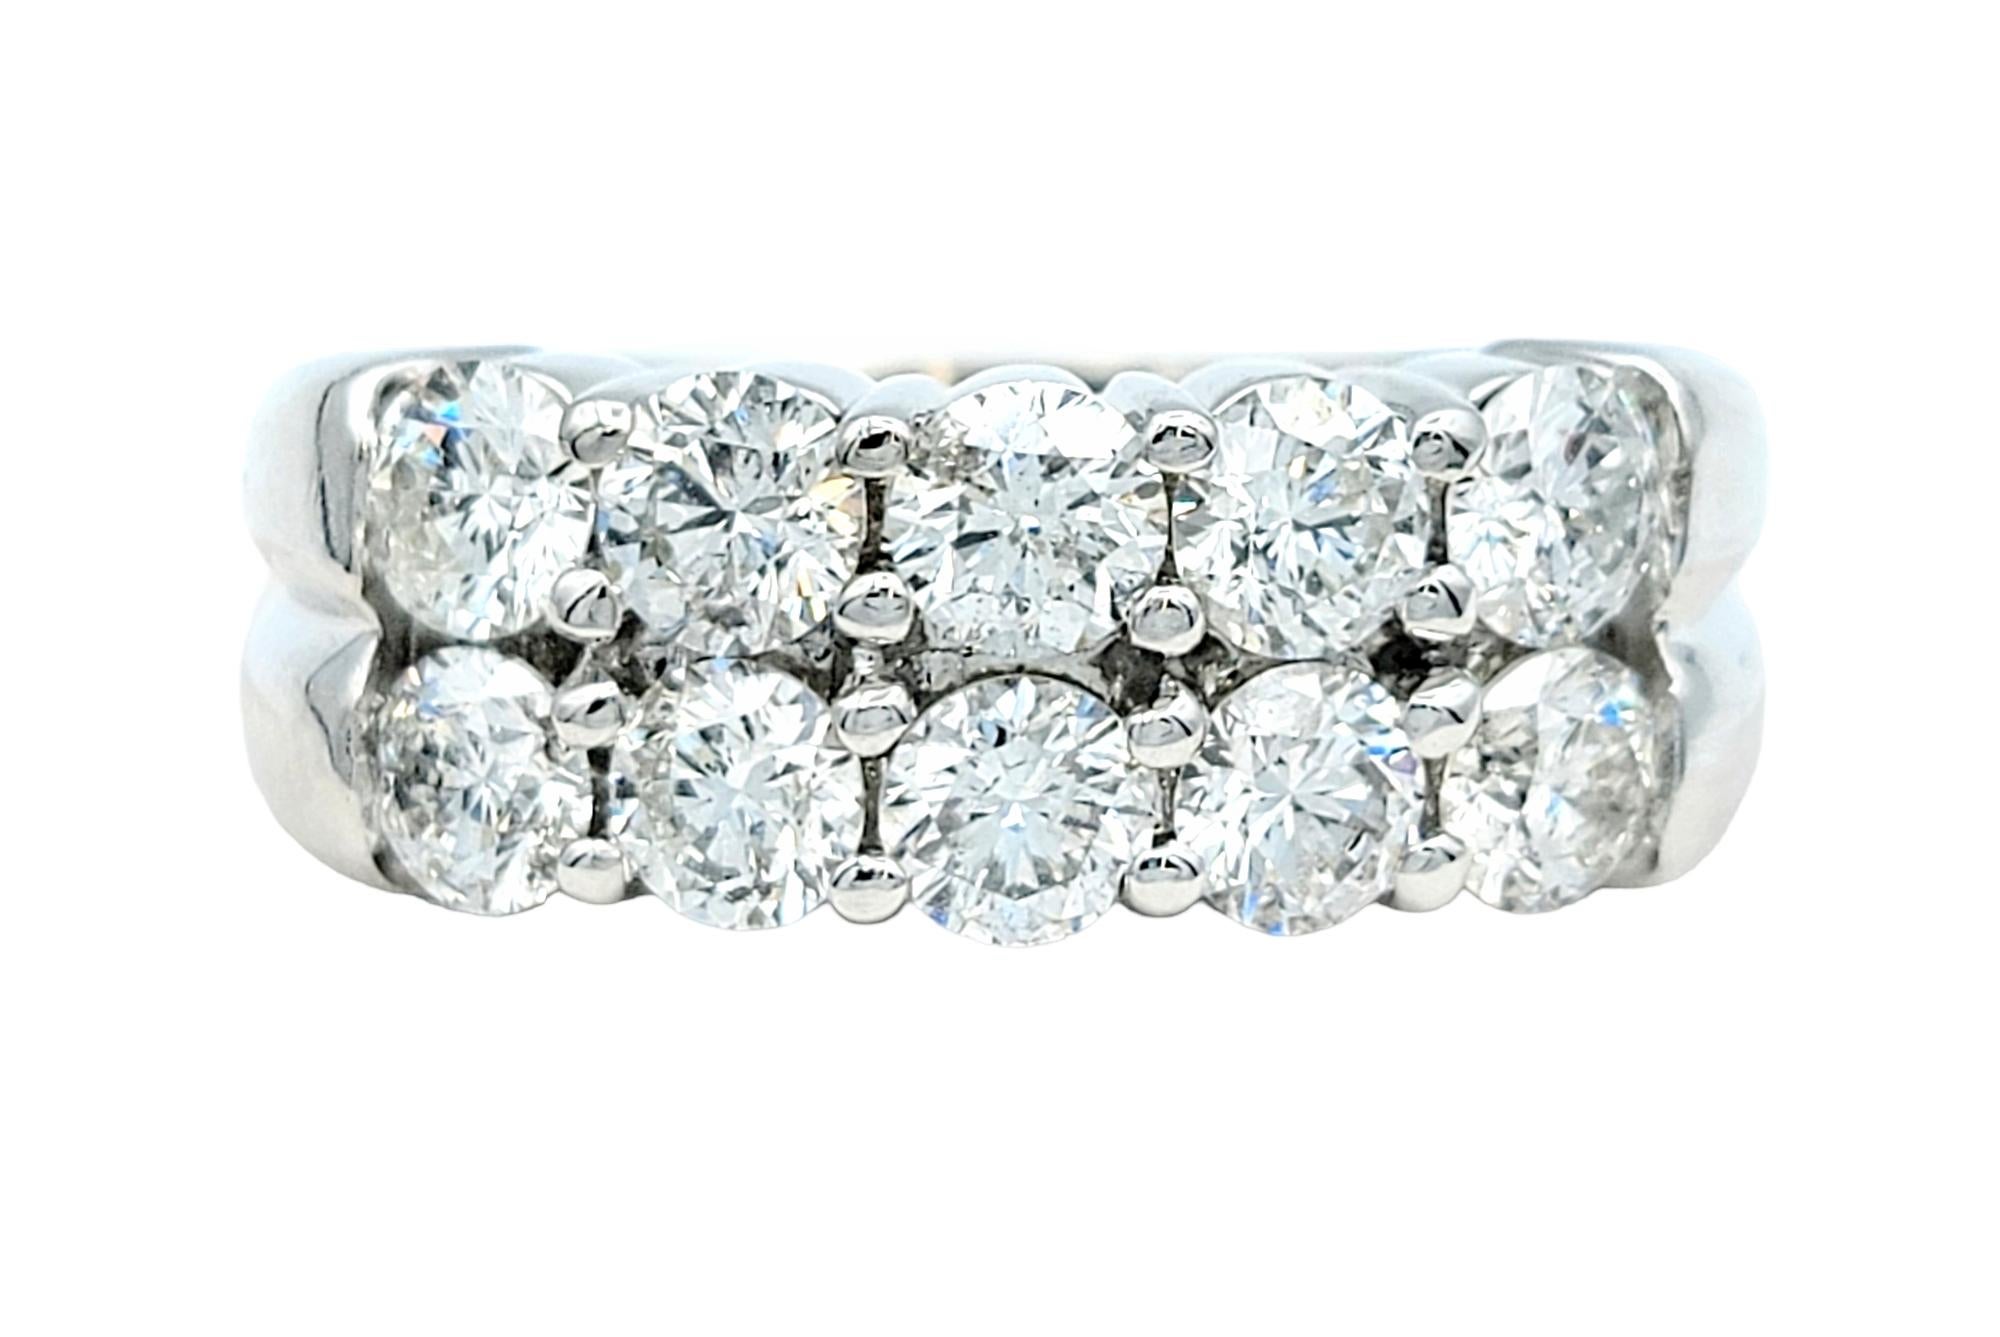 Ring size: 6.75

Elegance and sophistication converge in this stunning white gold band ring adorned with ten exquisite round diamonds Crafted with precision and passion, this ring is a testament to timeless beauty and enduring love.

The lustrous